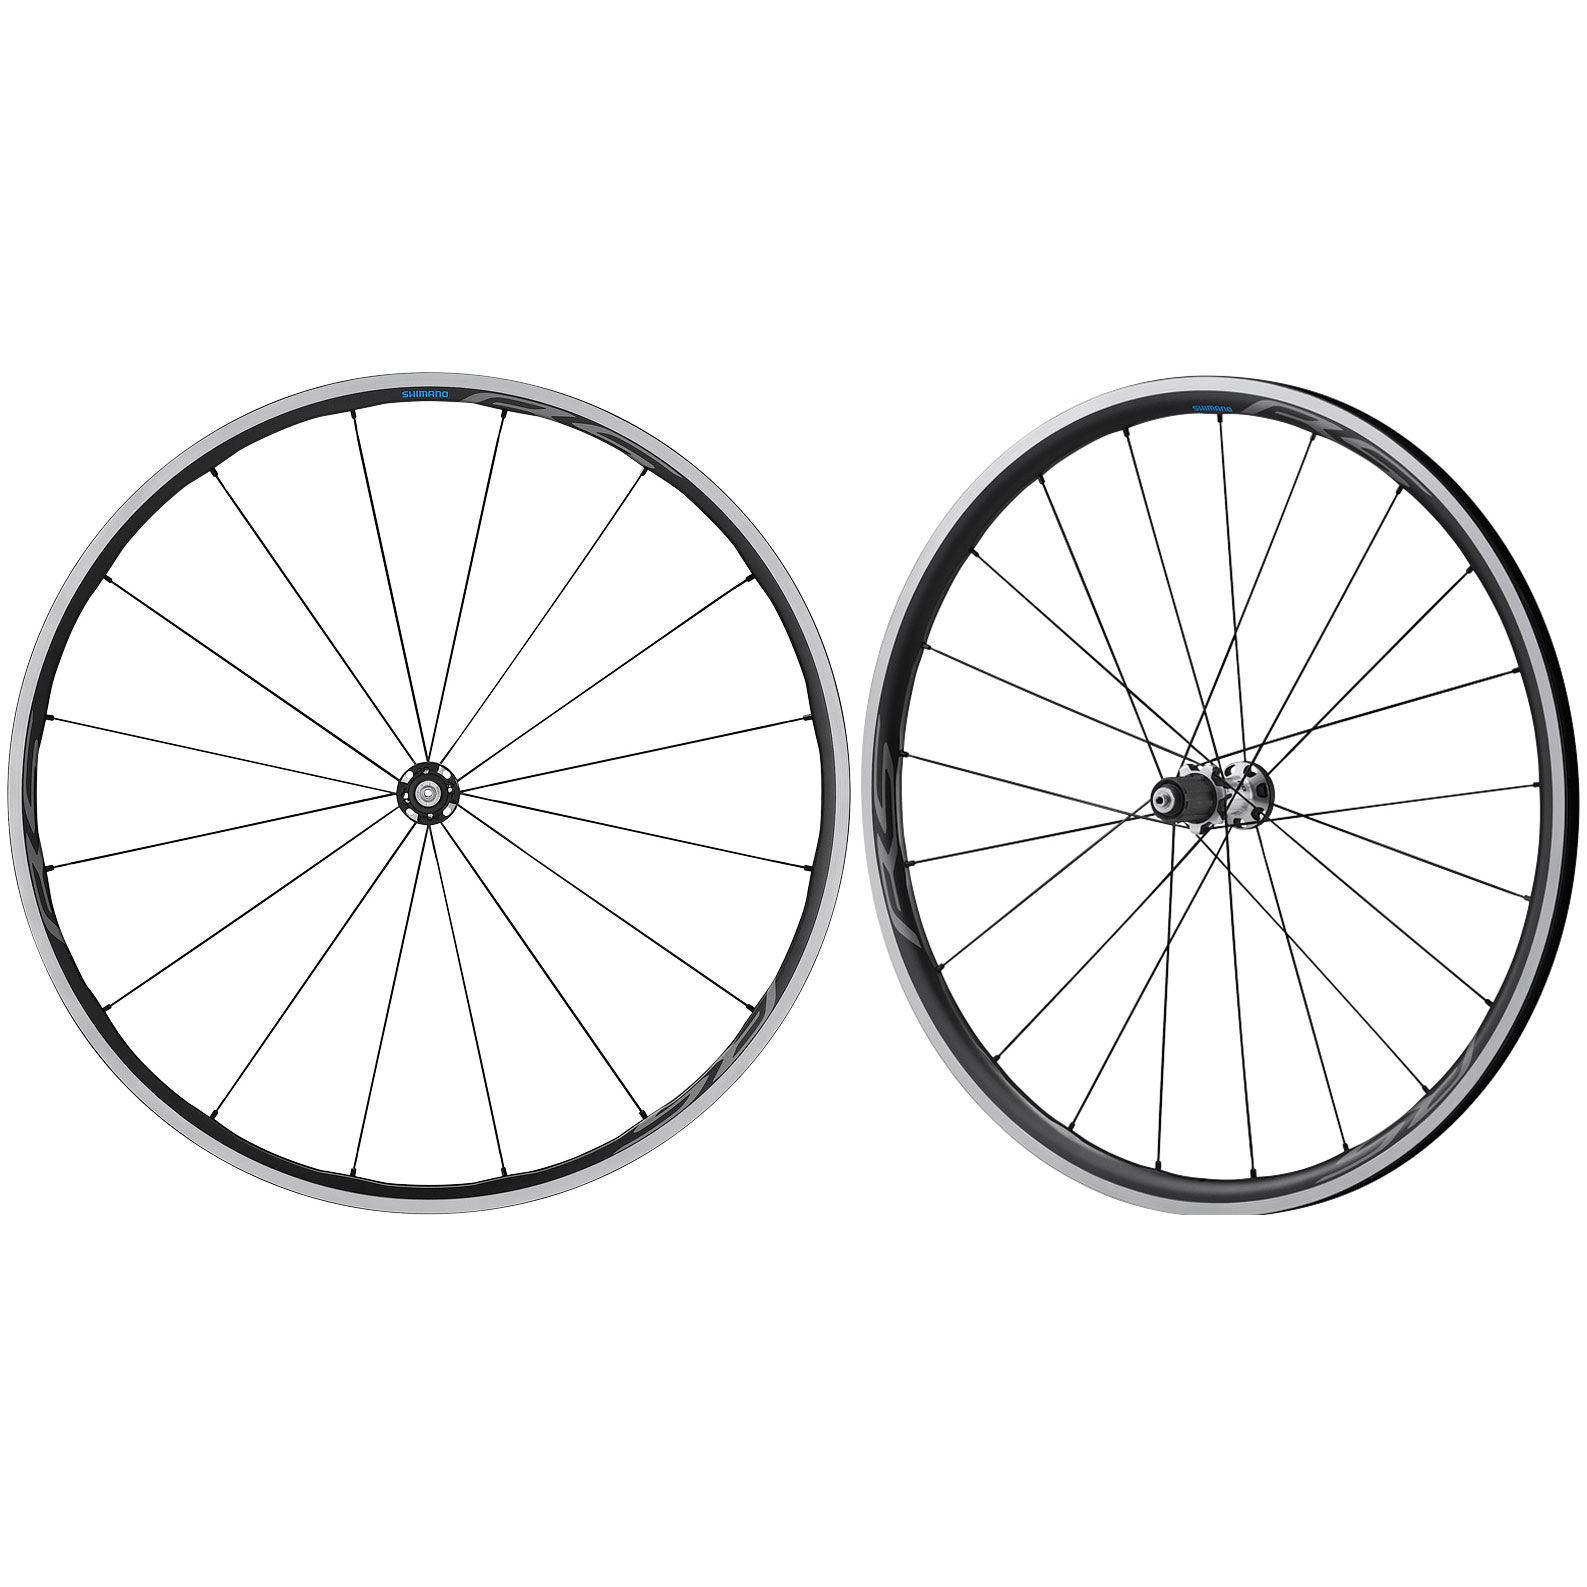 Shimano WH-RS700-C30-TL Wheelset - 28